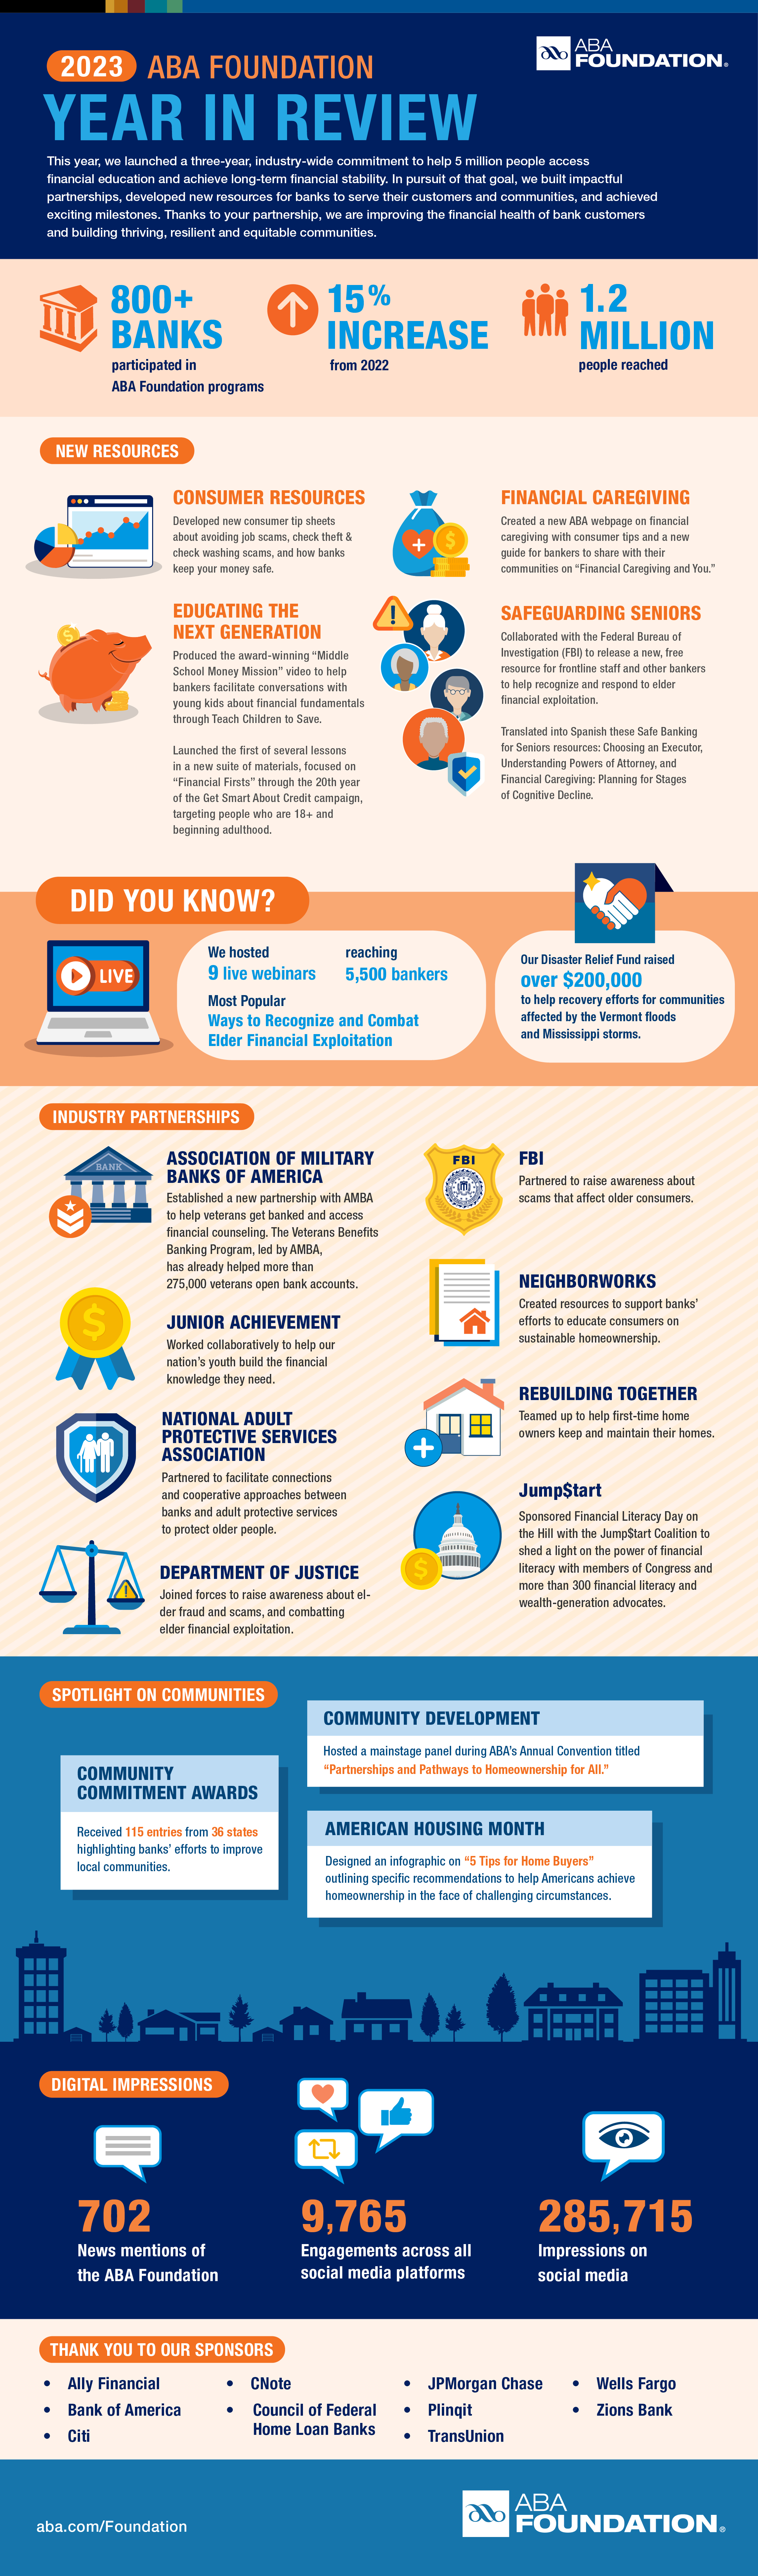 2023 ABA Foundation Year in Review Infographic